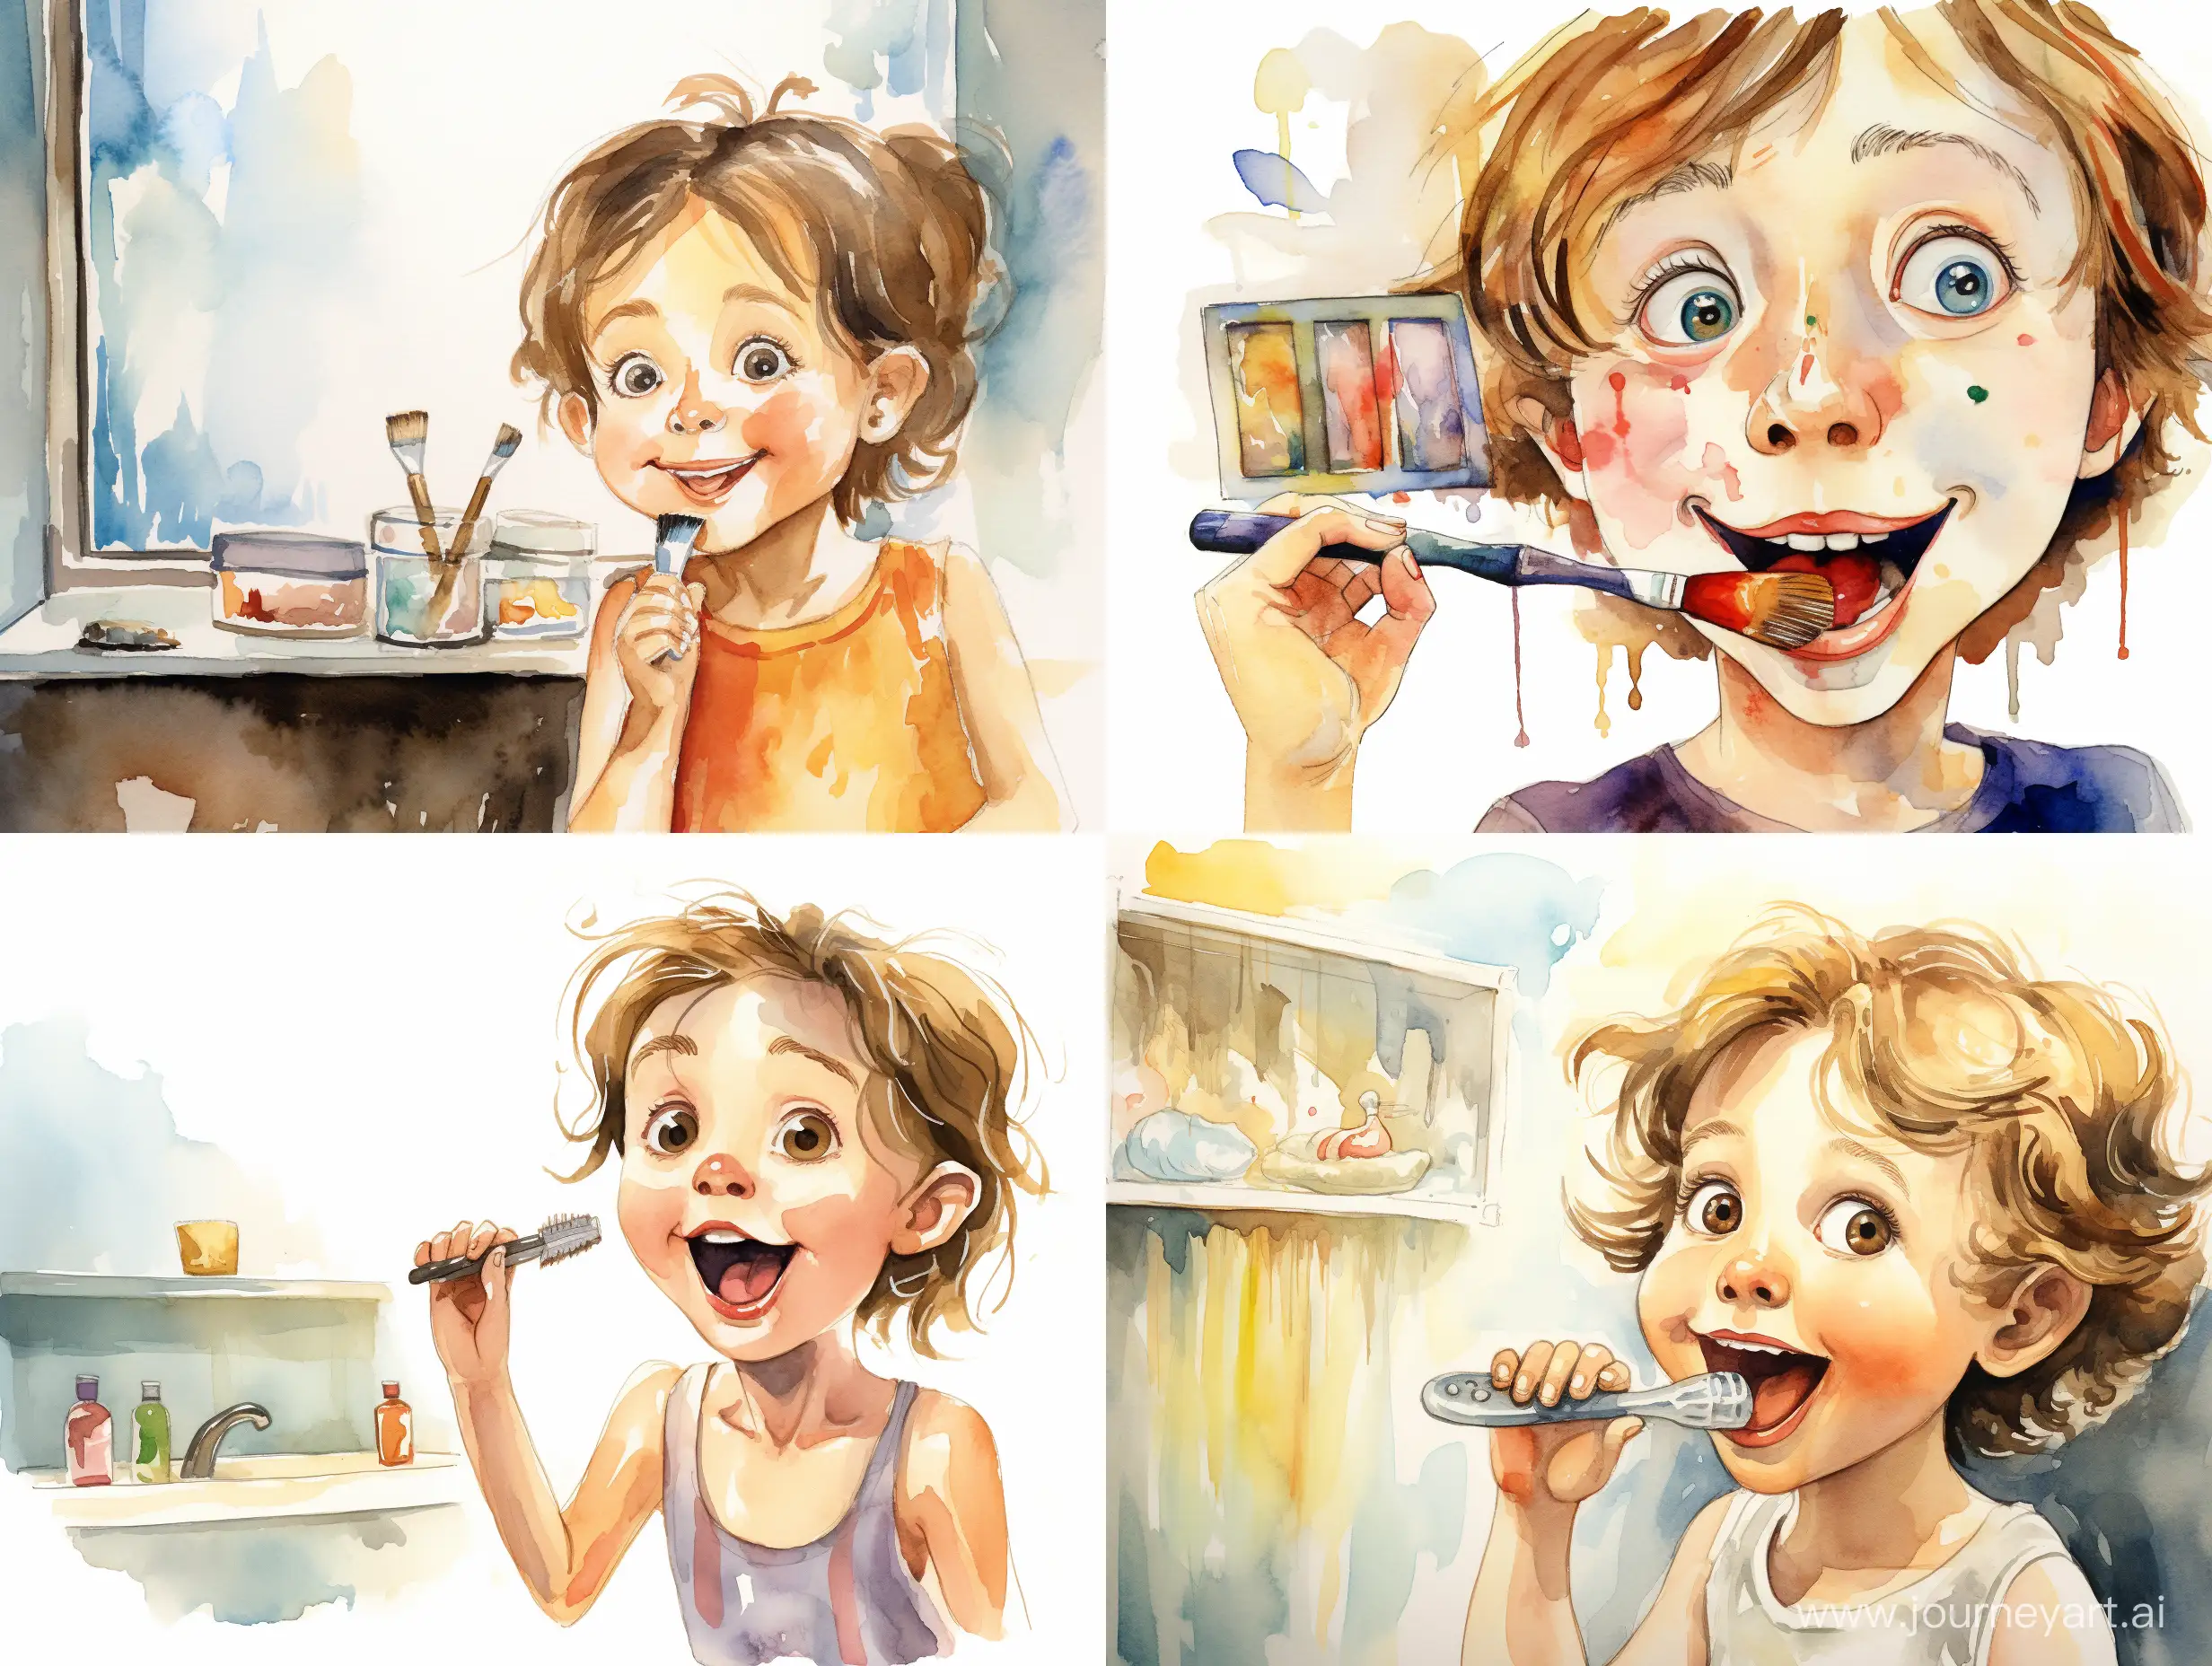 Adorable-Toddler-Brushing-Teeth-in-Vibrant-Watercolor-Illustration